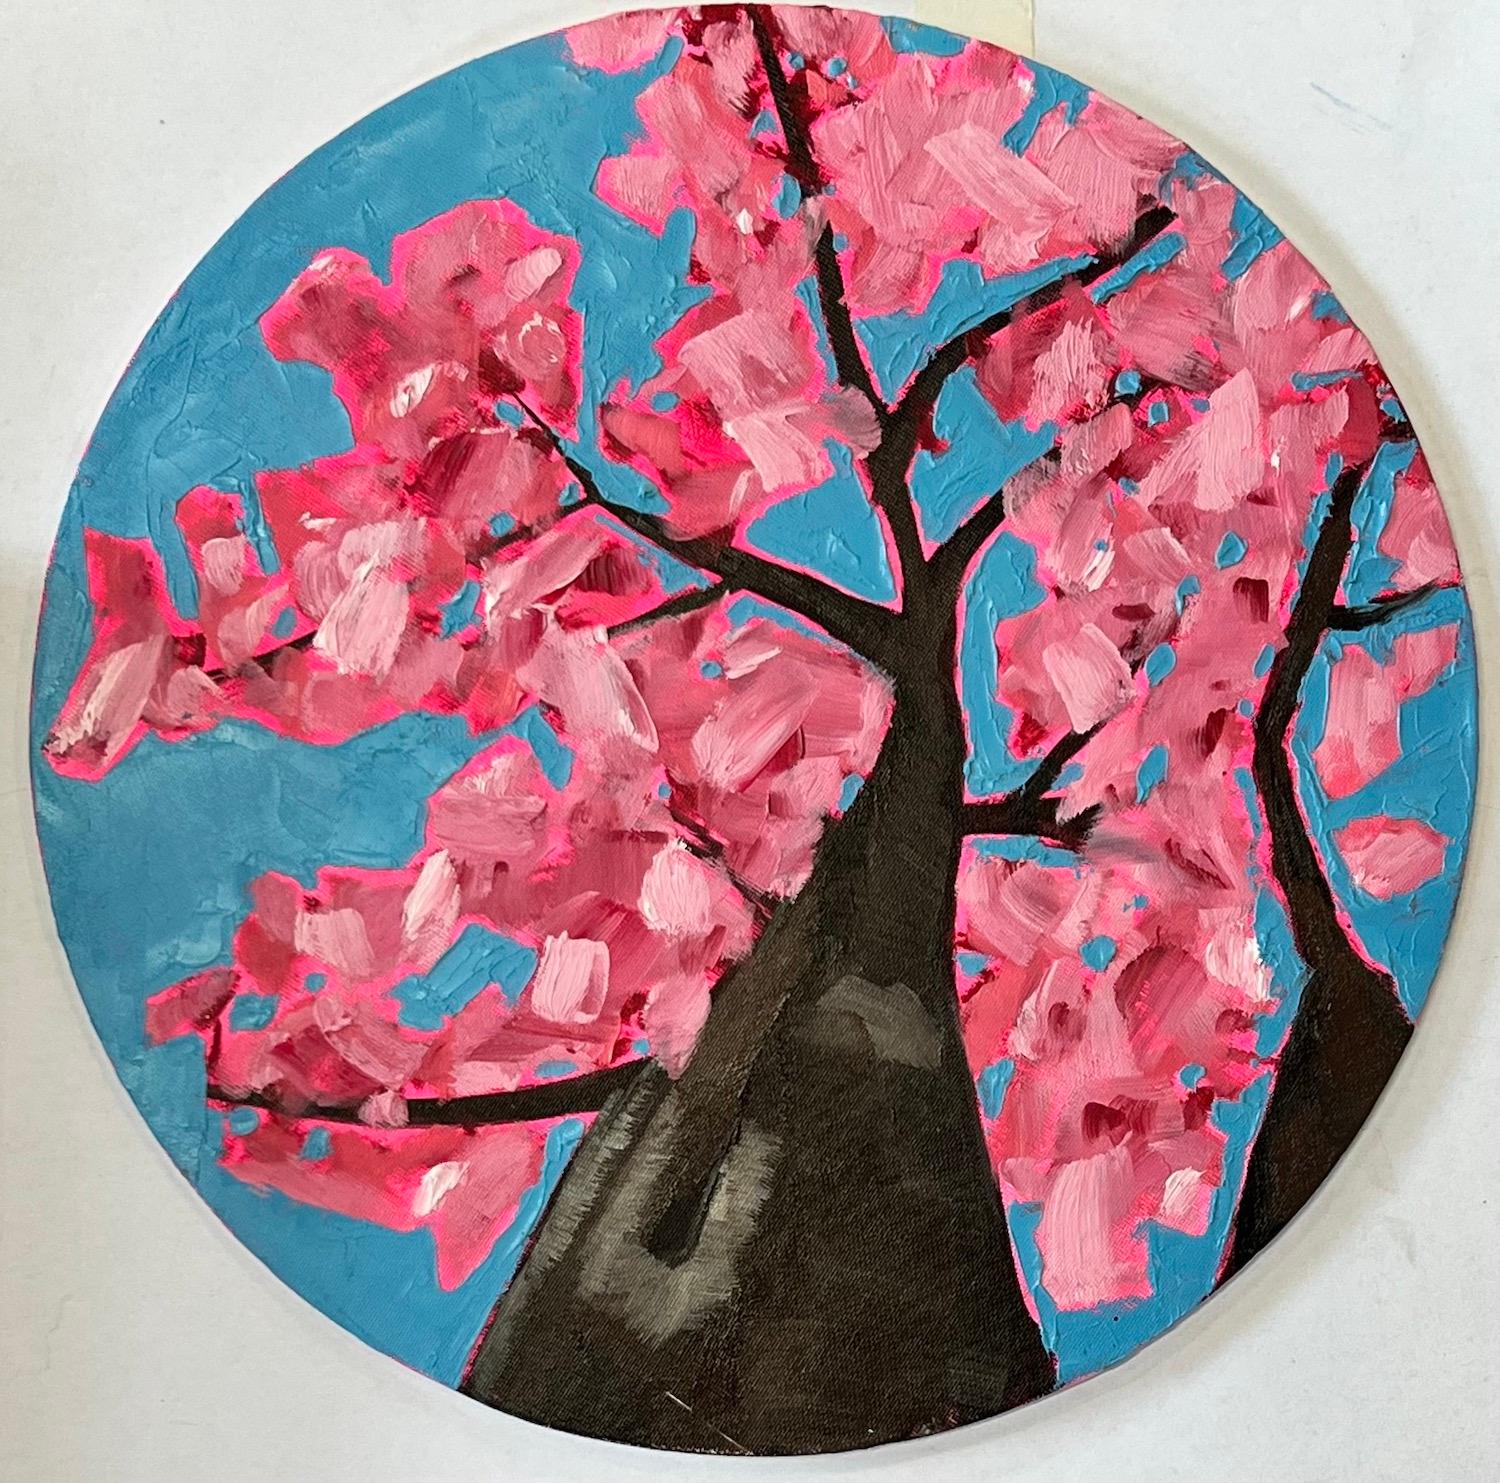 Looking Up Through Cherry Blossom to Reflect by Emily Finch [2021]
Signed by the artist
Oil on canvas board
Image size: H:30 cm x W:30 cm x D 0.3cm 
Sold Unframed
Please note that insitu images are purely an indication of how a piece may look
This